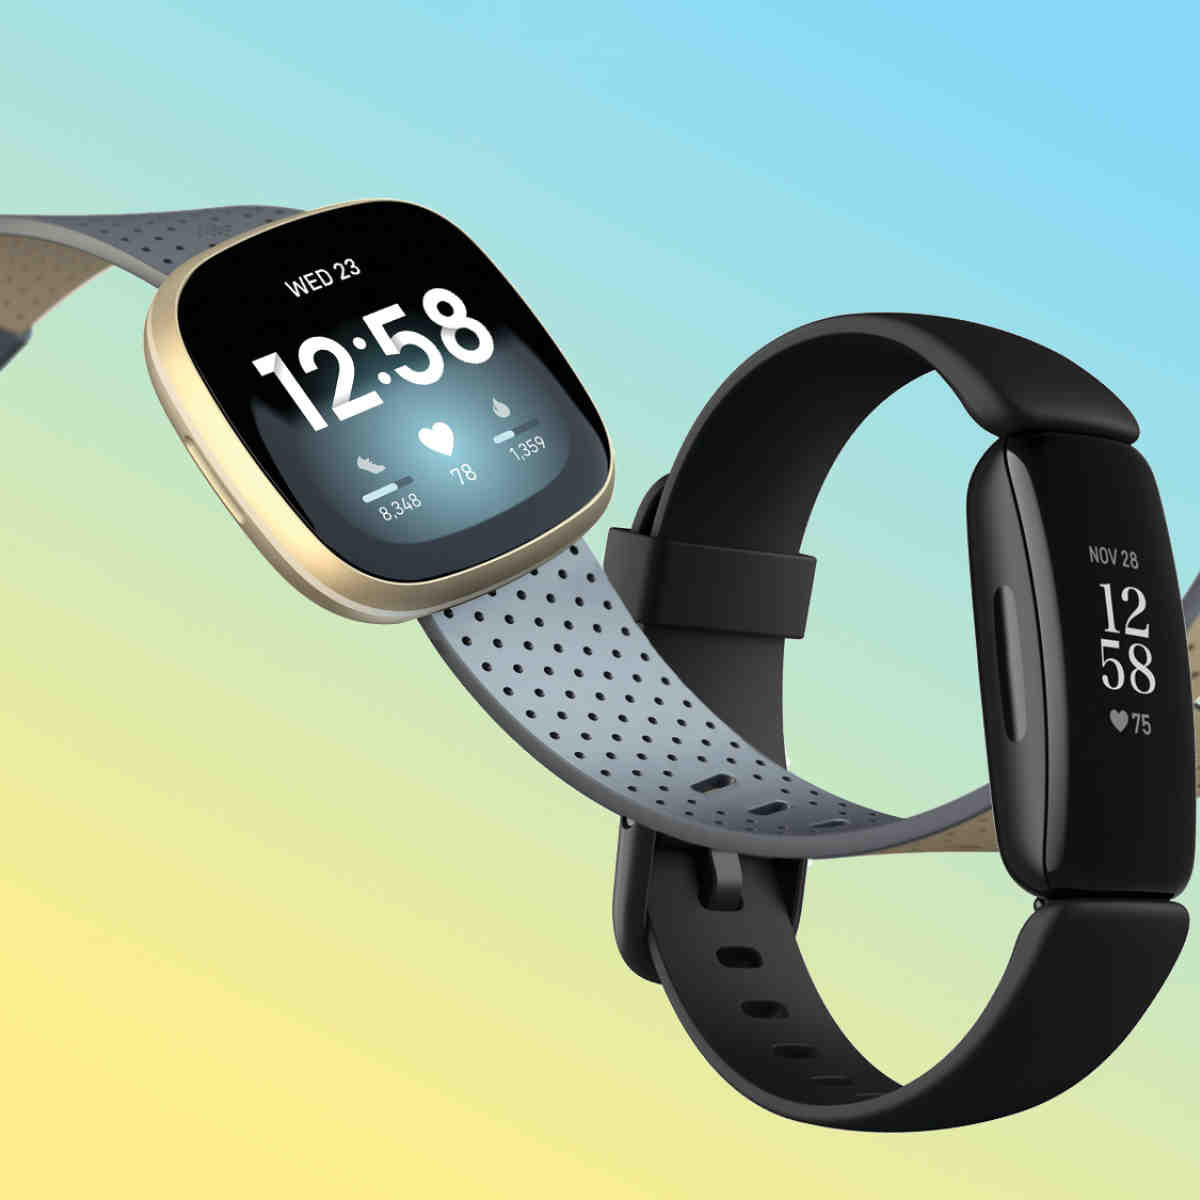 Is it worth getting a Fitbit?